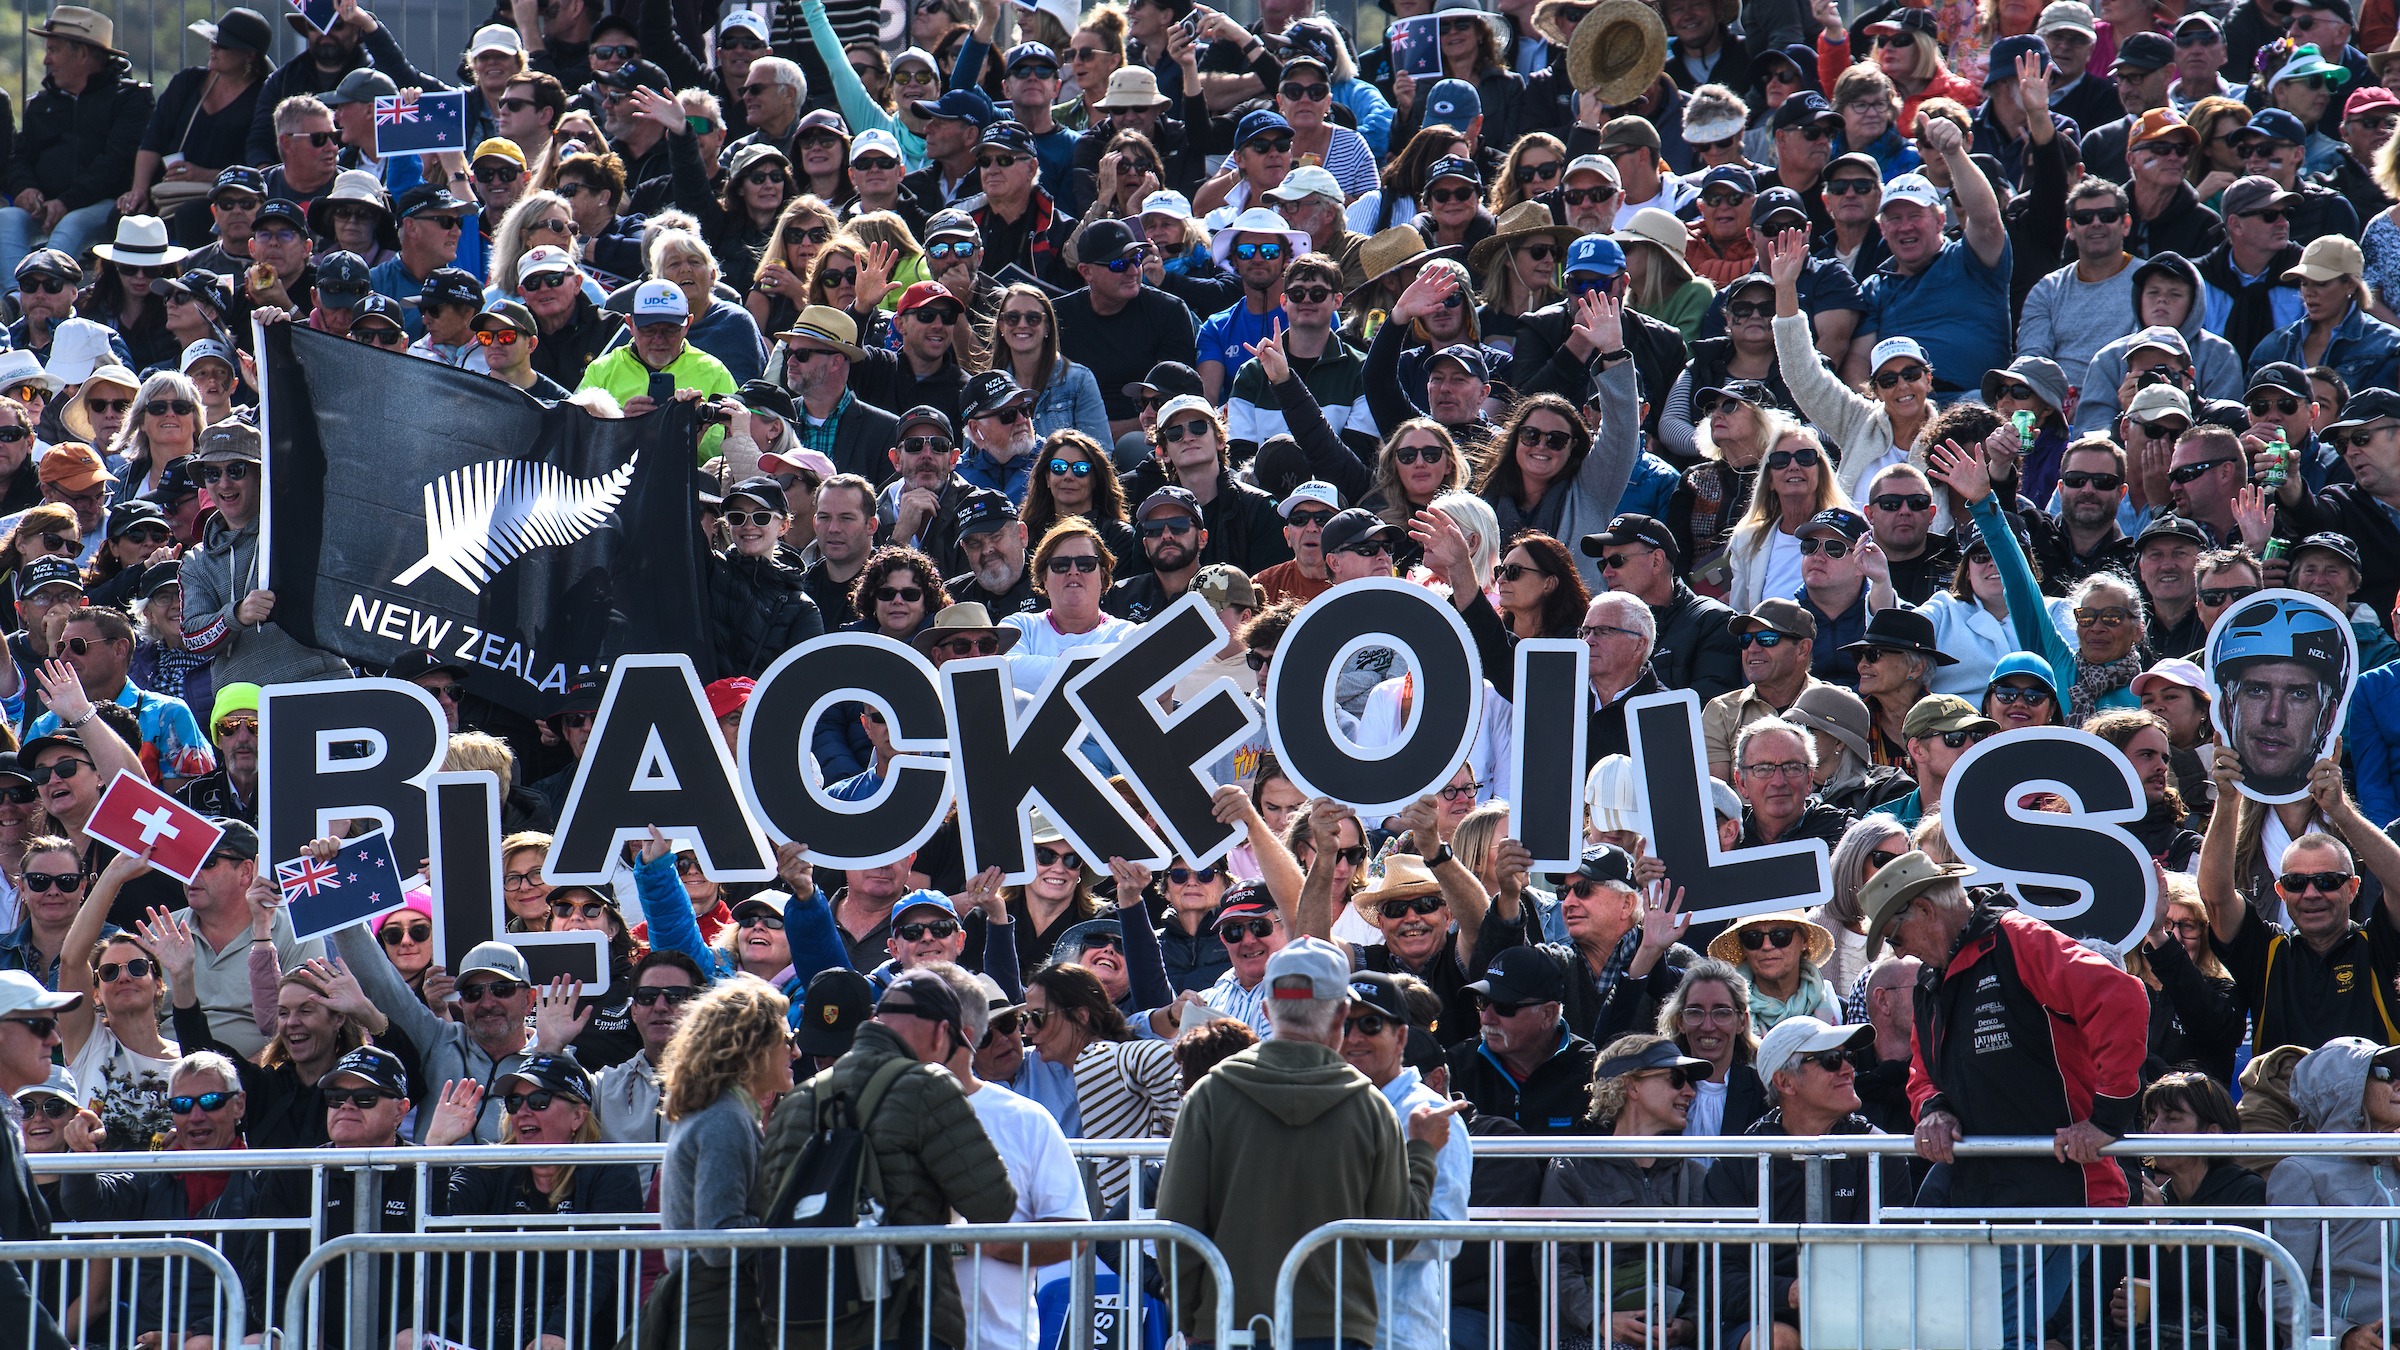 Season 4 // Crowds hold Black Foils signs in Christchurch 